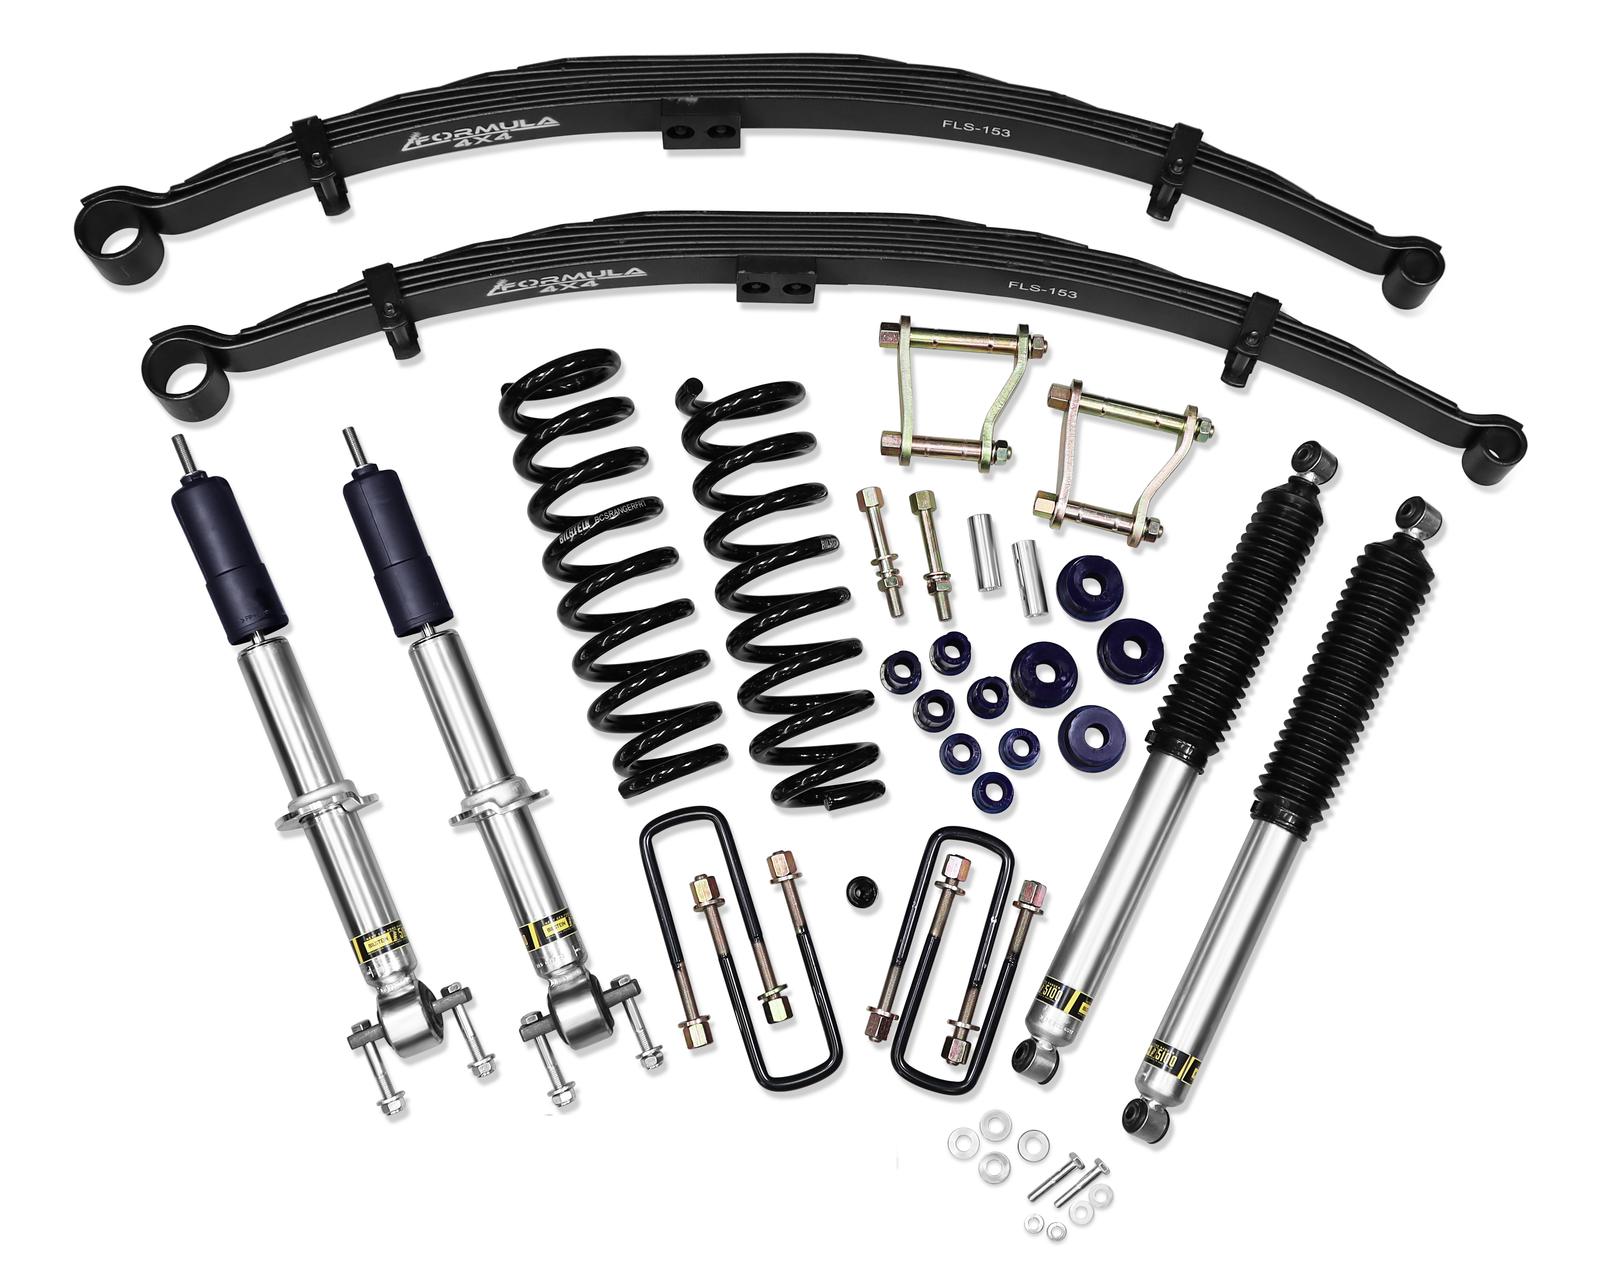 2 Inch 50mm Bilstein B8 5100 4x4 Lift Kit to suit Ford Ranger PY, P703 & VW Amarok T1A, T1B 2022-on 6 Cylinder